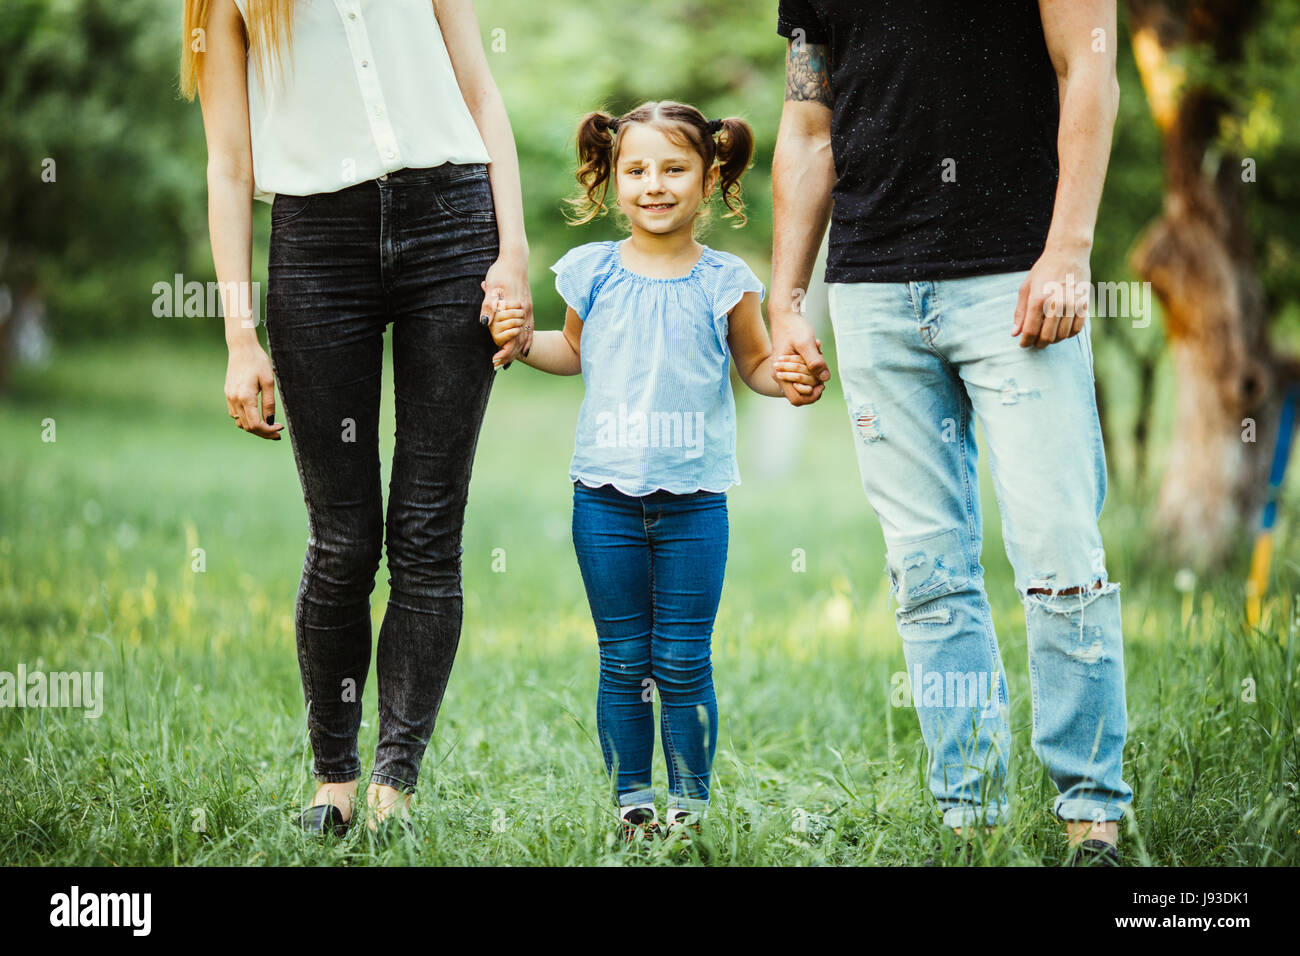 Excited young girl holding hands while walking with parents in park Stock Photo